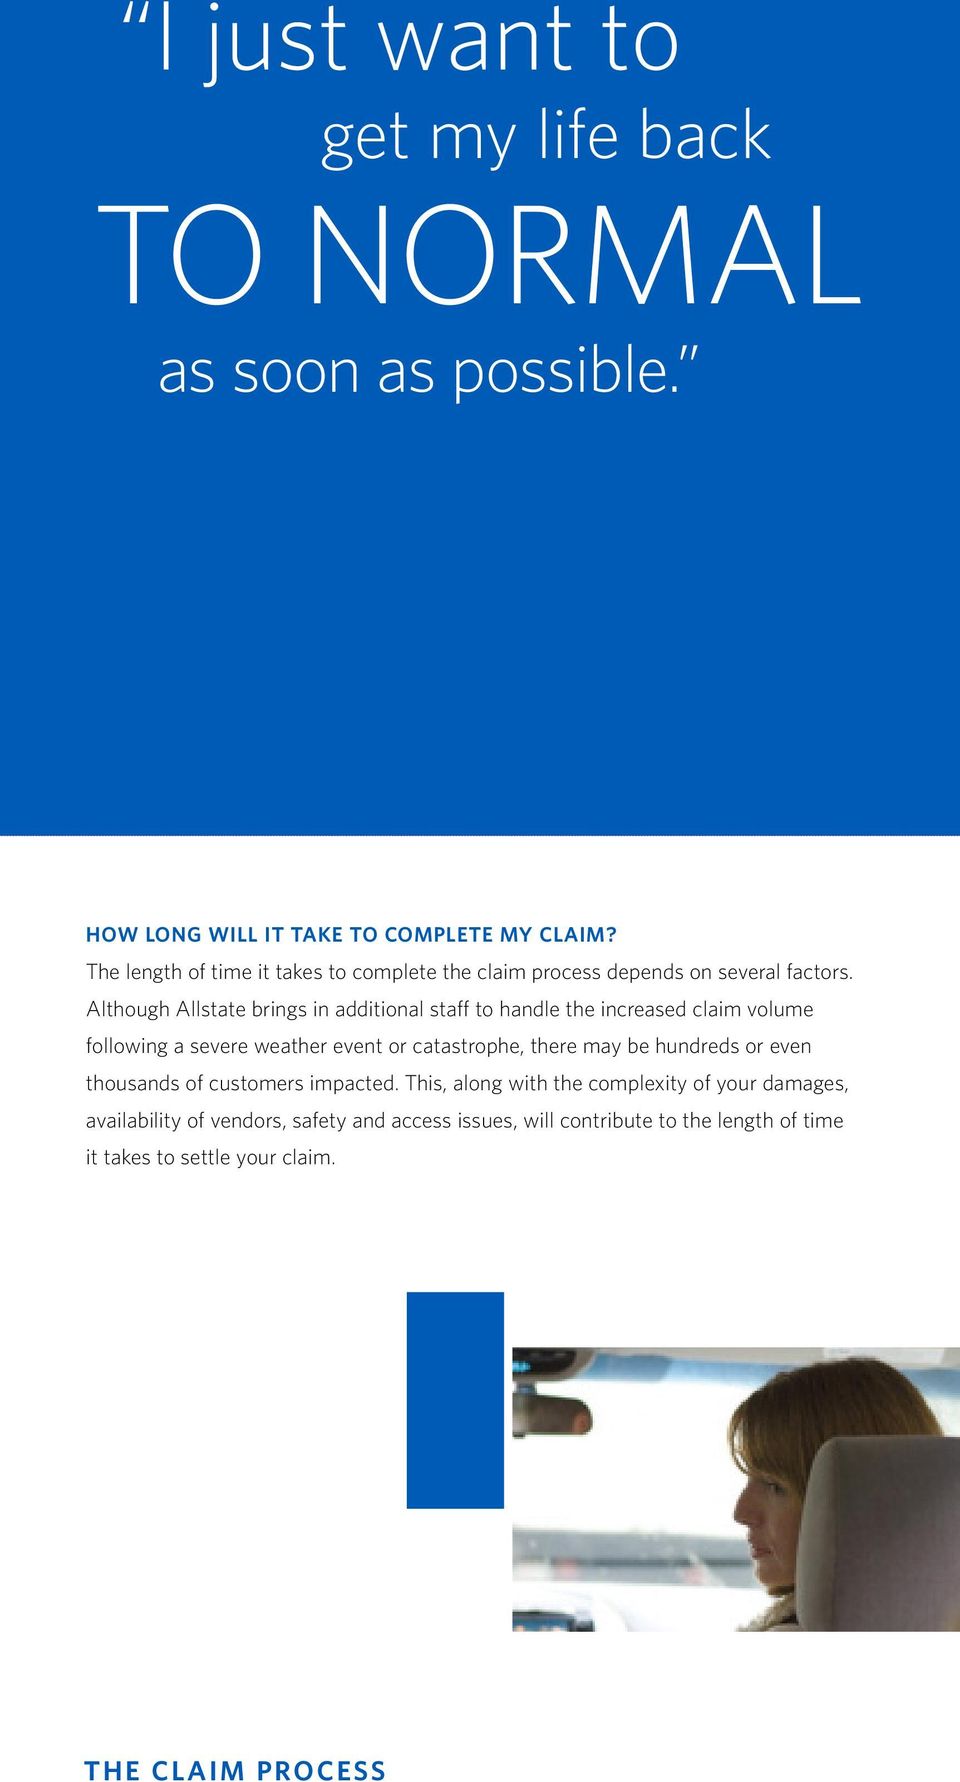 Although Allstate brings in additional staff to handle the increased claim volume following a severe weather event or catastrophe, there may be